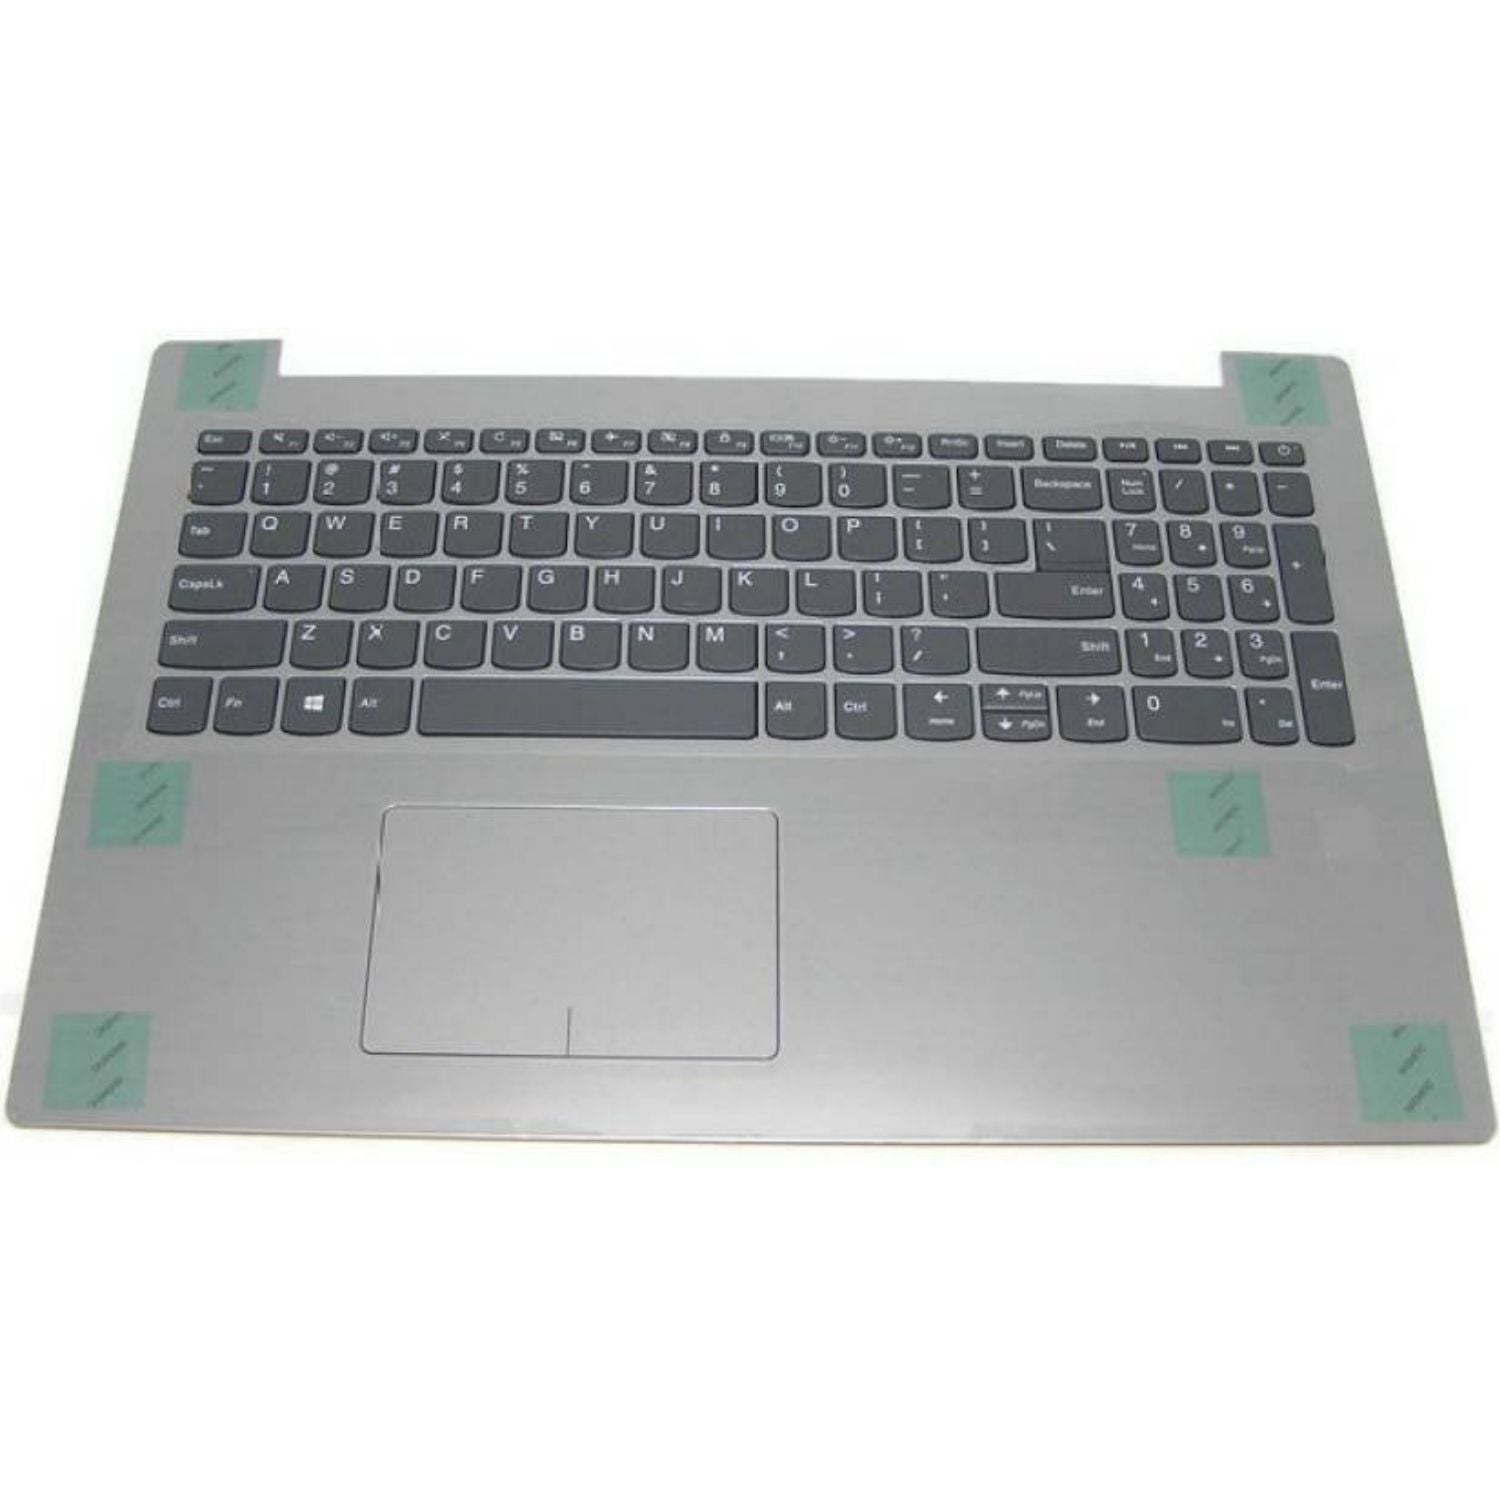 Laptop Touchpad for Lenovo Ideapad 320-15ISK 320-15 Series with Palmrest (with Keyboard Silver)